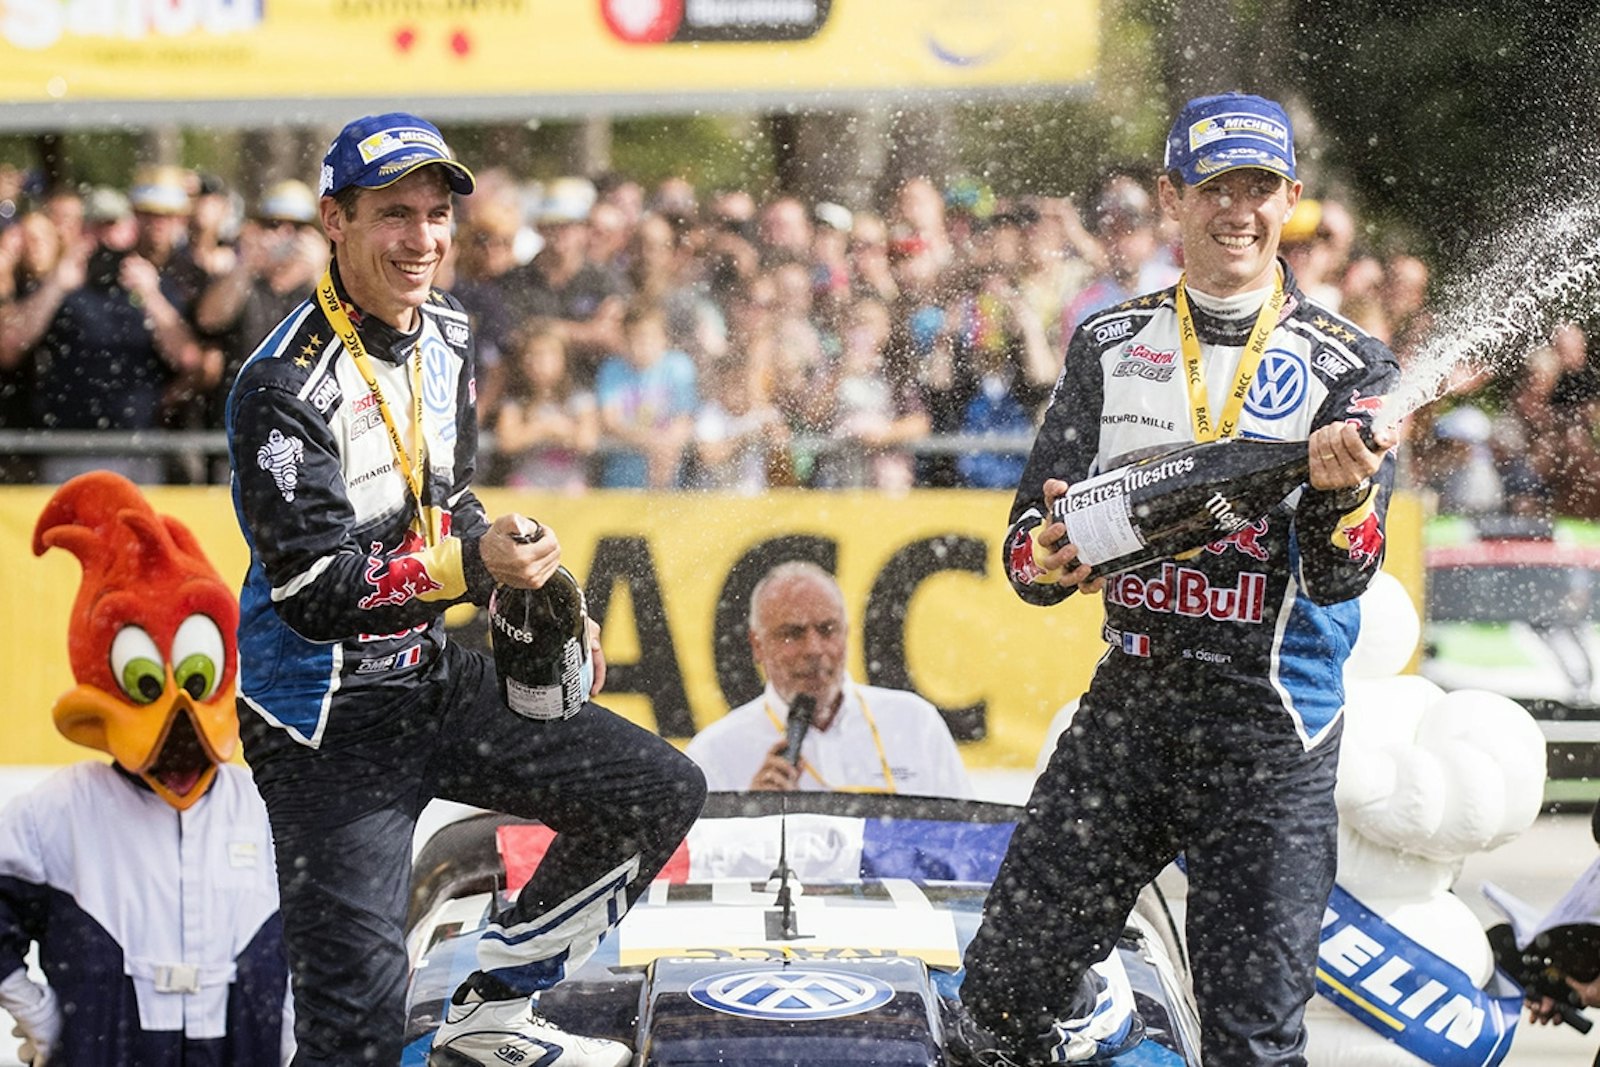 Sebastien Ogier (FRA), Julien Ingrassia celebrate the podium during FIA World Rally Championship 2016 Spain in Salou , Spain  on 16 October 2016 // Jaanus Ree/Red Bull Content Pool // P-20161016-00845 // Usage for editorial use only // Please go to www.redbullcontentpool.com for further information. //